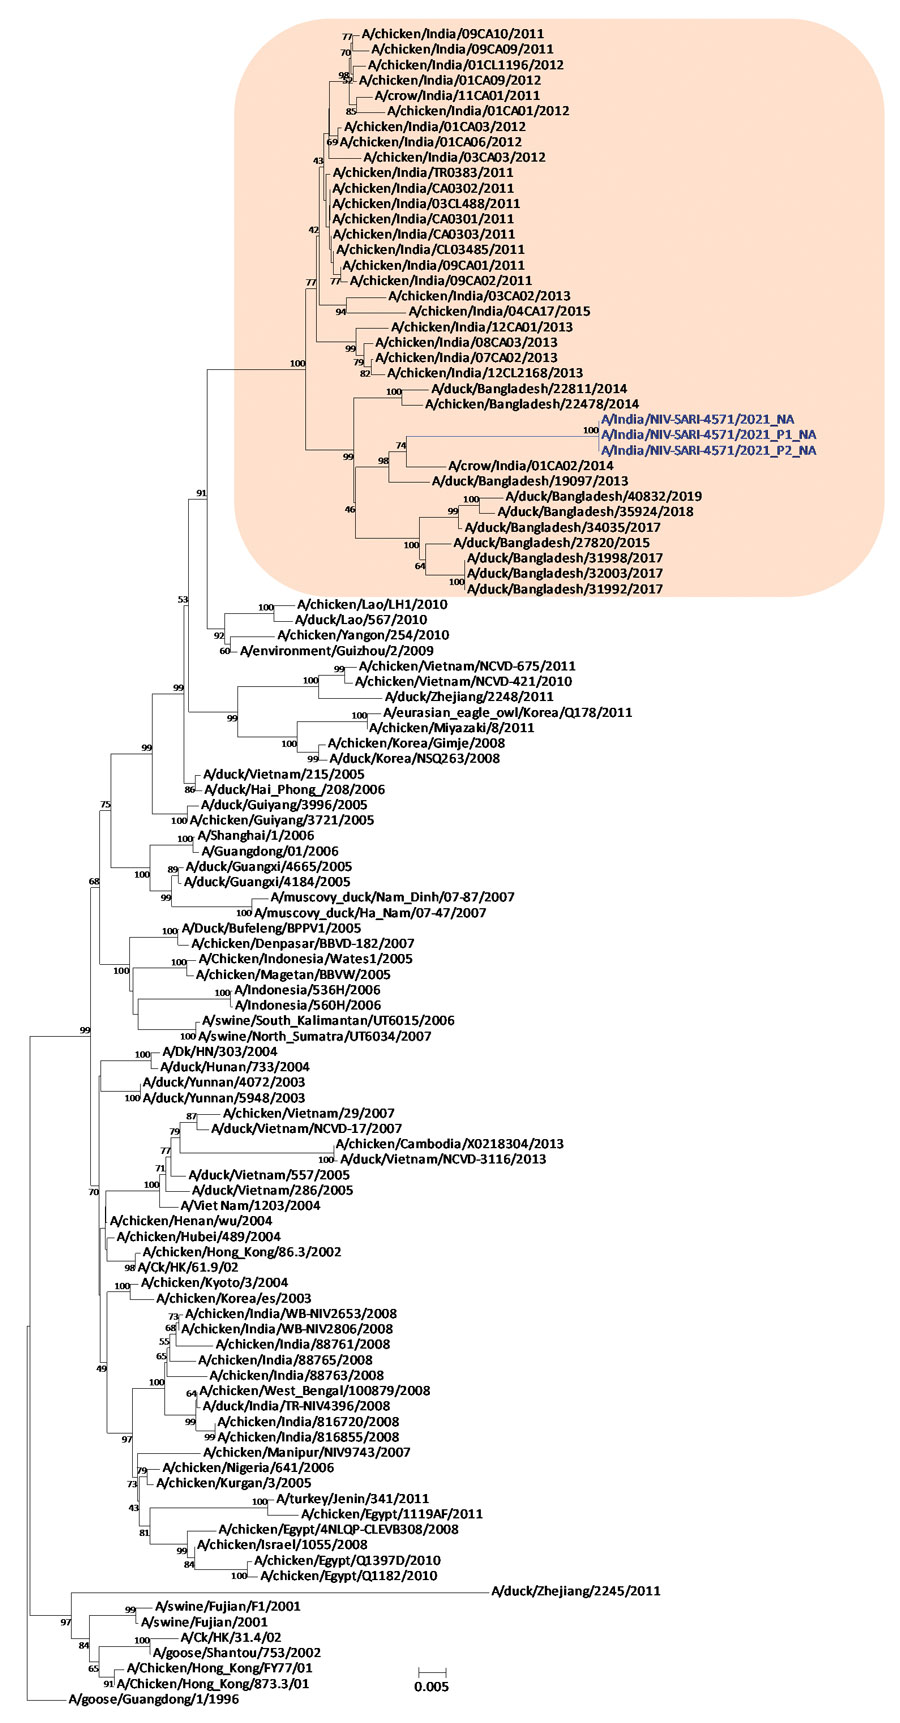 Neuraminidase gene phylogenetic tree constructed using the neighbor-joining method as implemented in MEGA 7 (https://www.megasoftware.net). Blue text indicates the study strains (clinical and isolate); shaded area represents the Bangladesh and India strains in clade 2.3.2.1a. Gs/Guangdong/1/96 was used as the outgroup sequence. Scale bar indicates number of nucleotide substitutions per site.